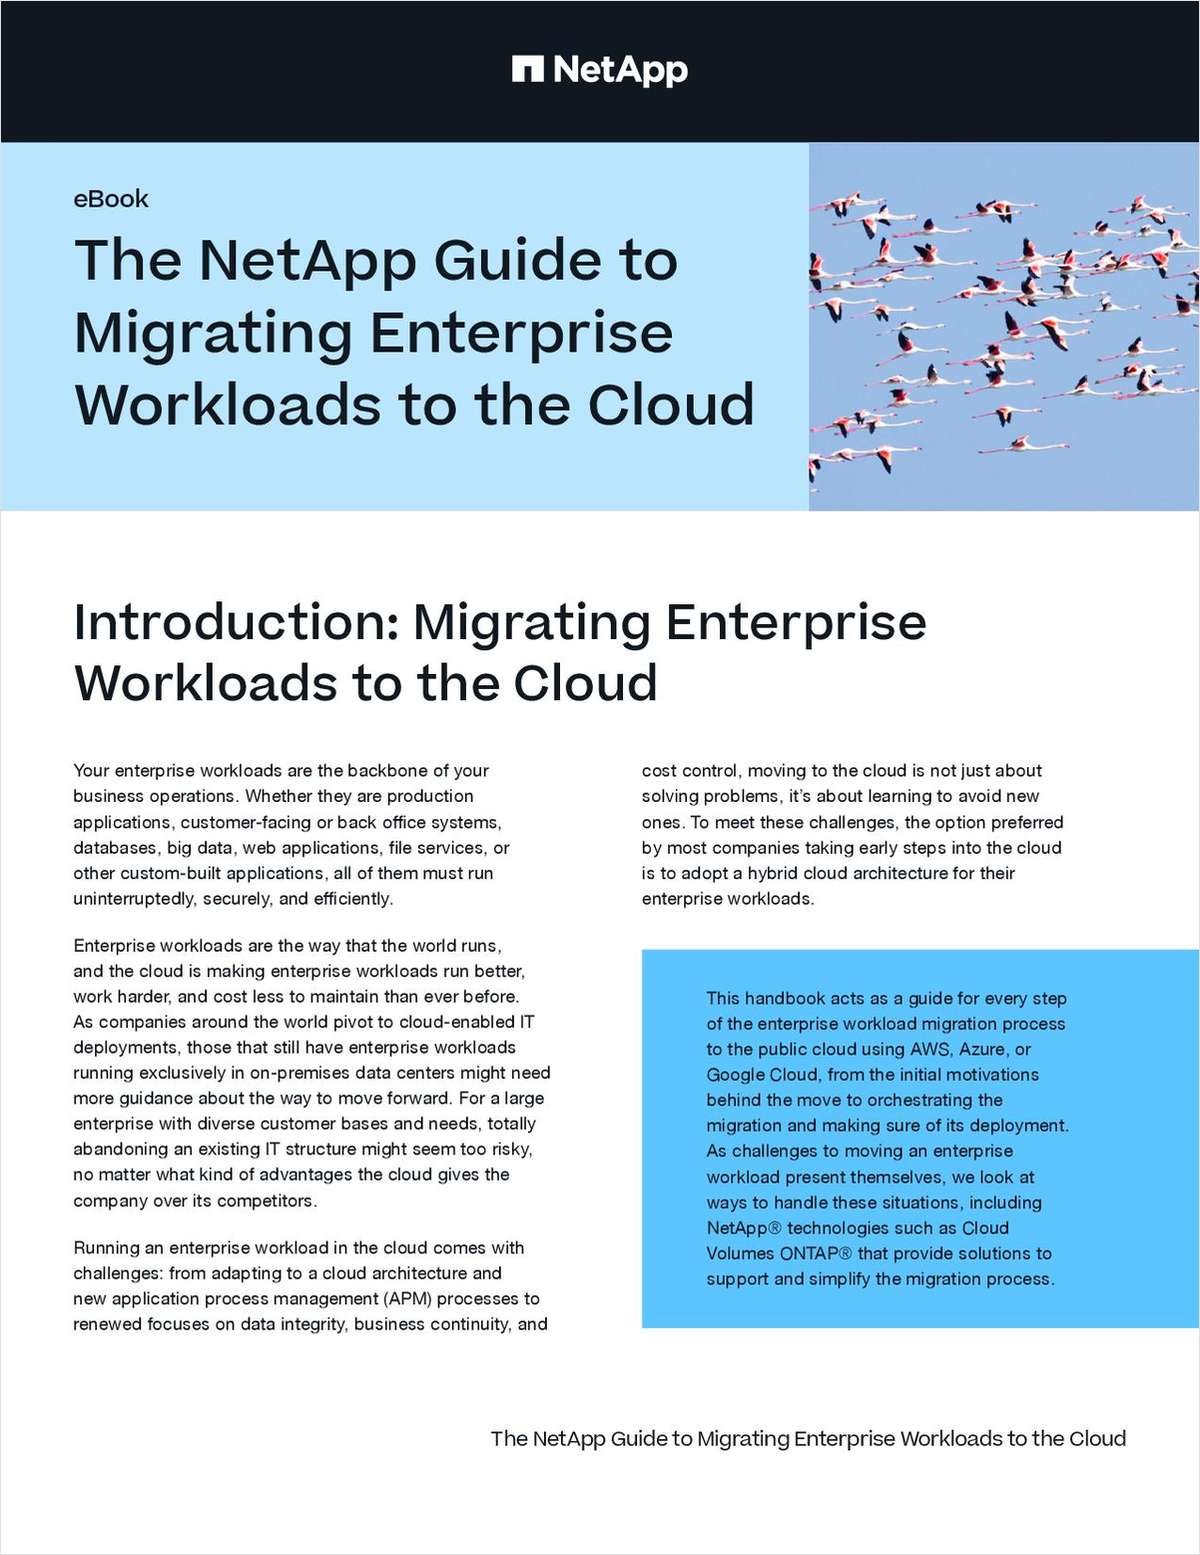 Why Should Enterprise Workloads Migrate to the Cloud?